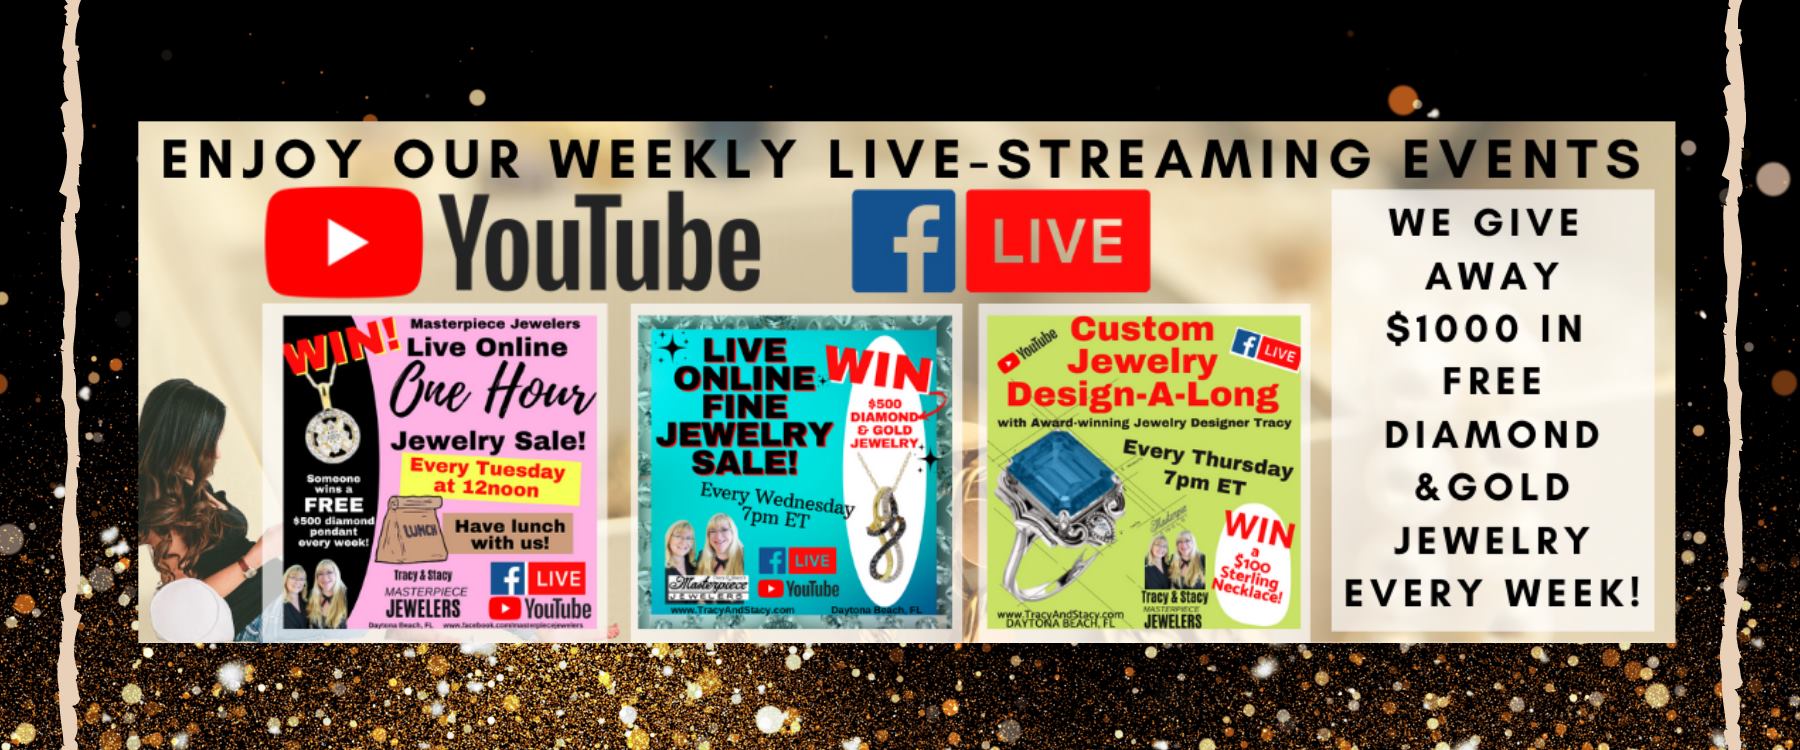 Join your Florida family jewelers LIVE at https://www.facebook.com/masterpiecejewelers!